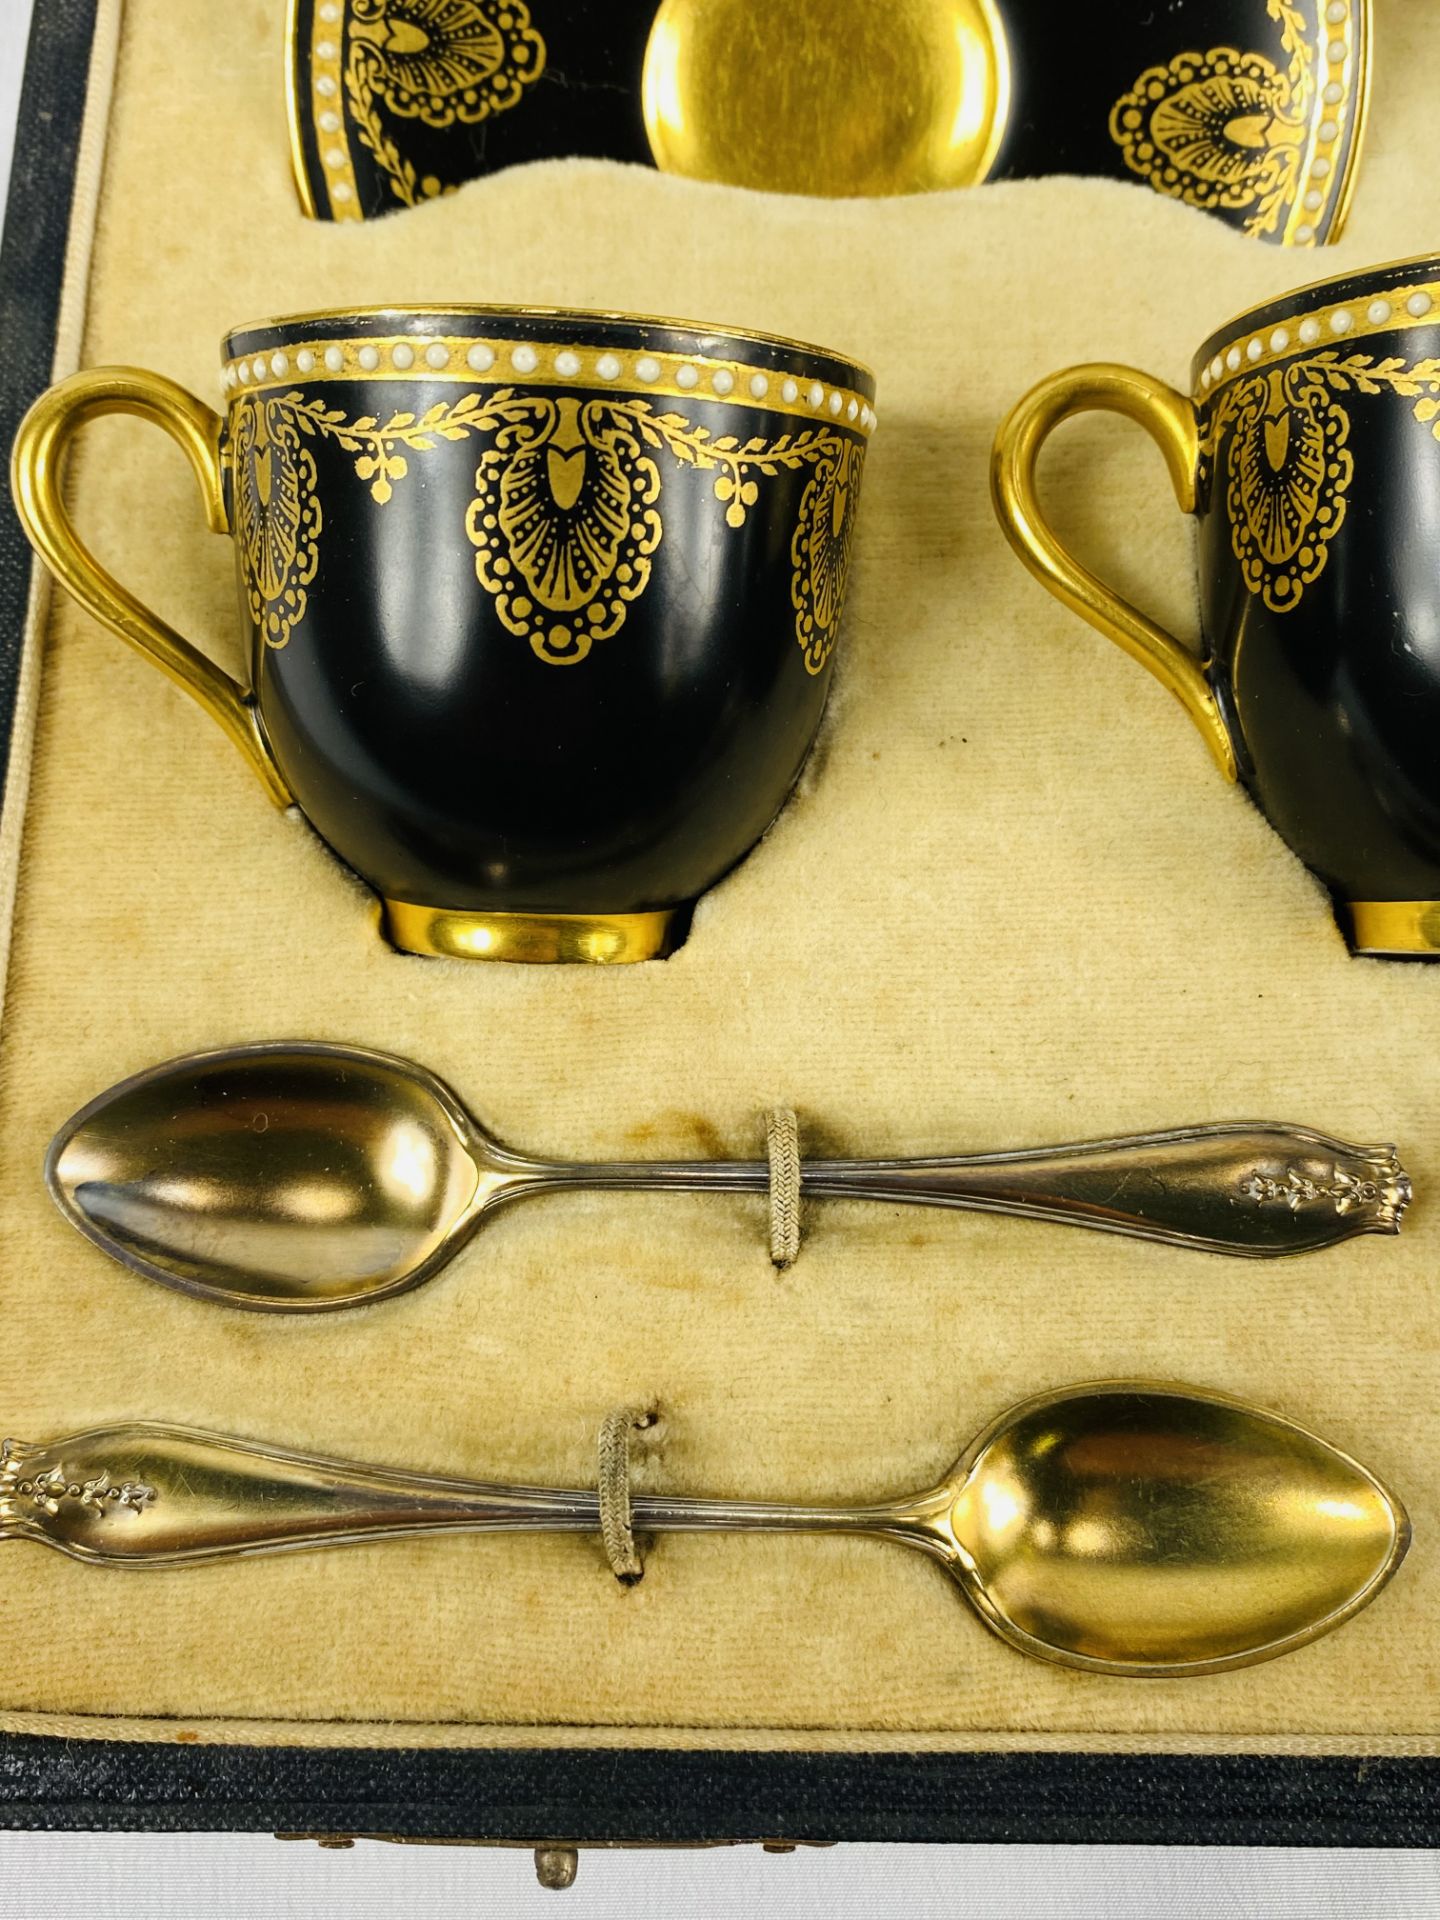 Boxed Royal Worcester coffee set with silver teaspoons, 1919 - Image 3 of 8